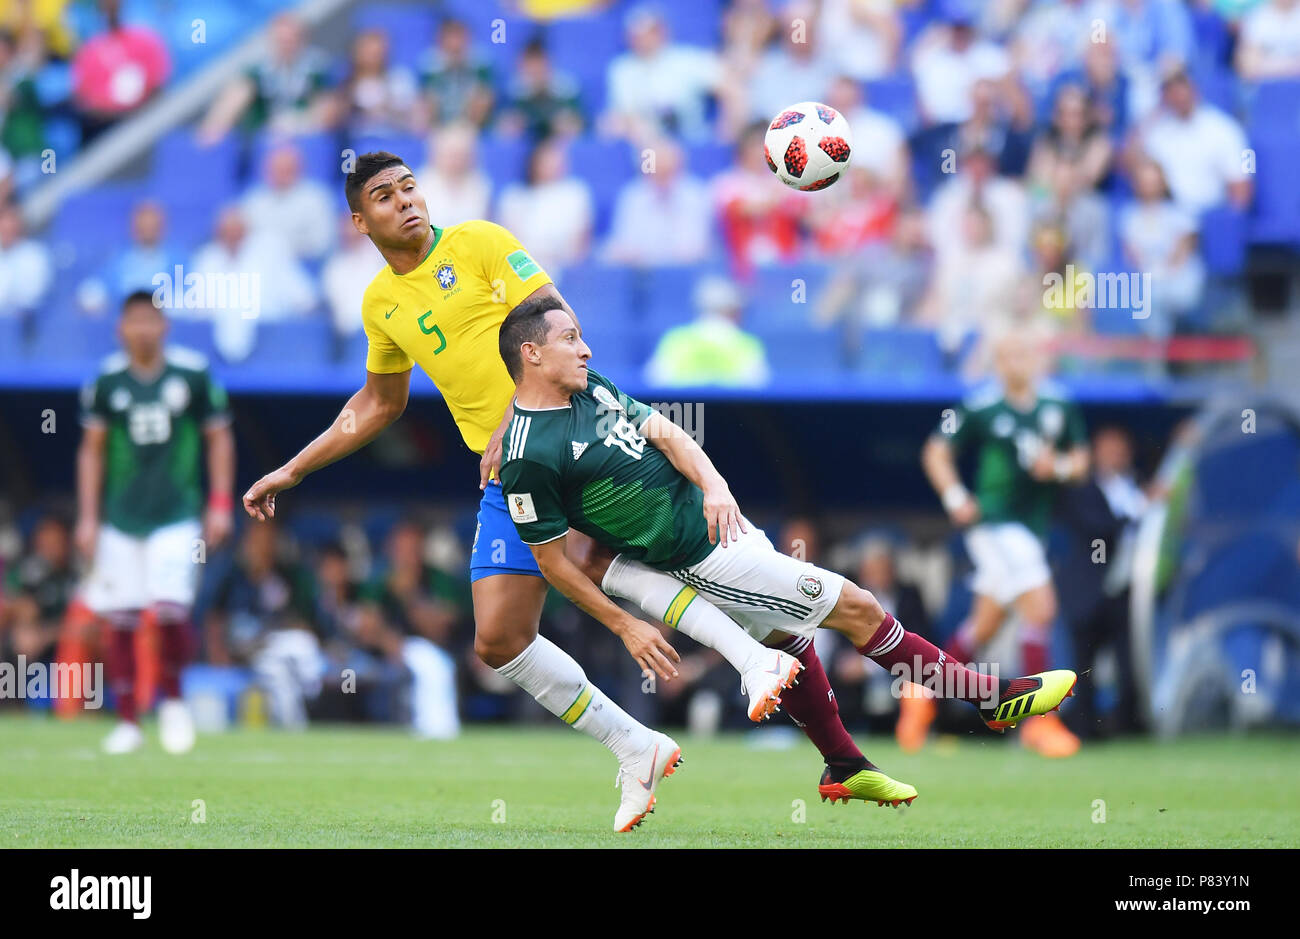 SAMARA, RUSSIA - JULY 02: Casemiro of Brazil competes with Andres Guardado of Mexico during the 2018 FIFA World Cup Russia Round of 16 match between Brazil and Mexico at Samara Arena on July 2, 2018 in Samara, Russia. (Photo by Lukasz Laskowski/PressFocus/MB Media) Stock Photo